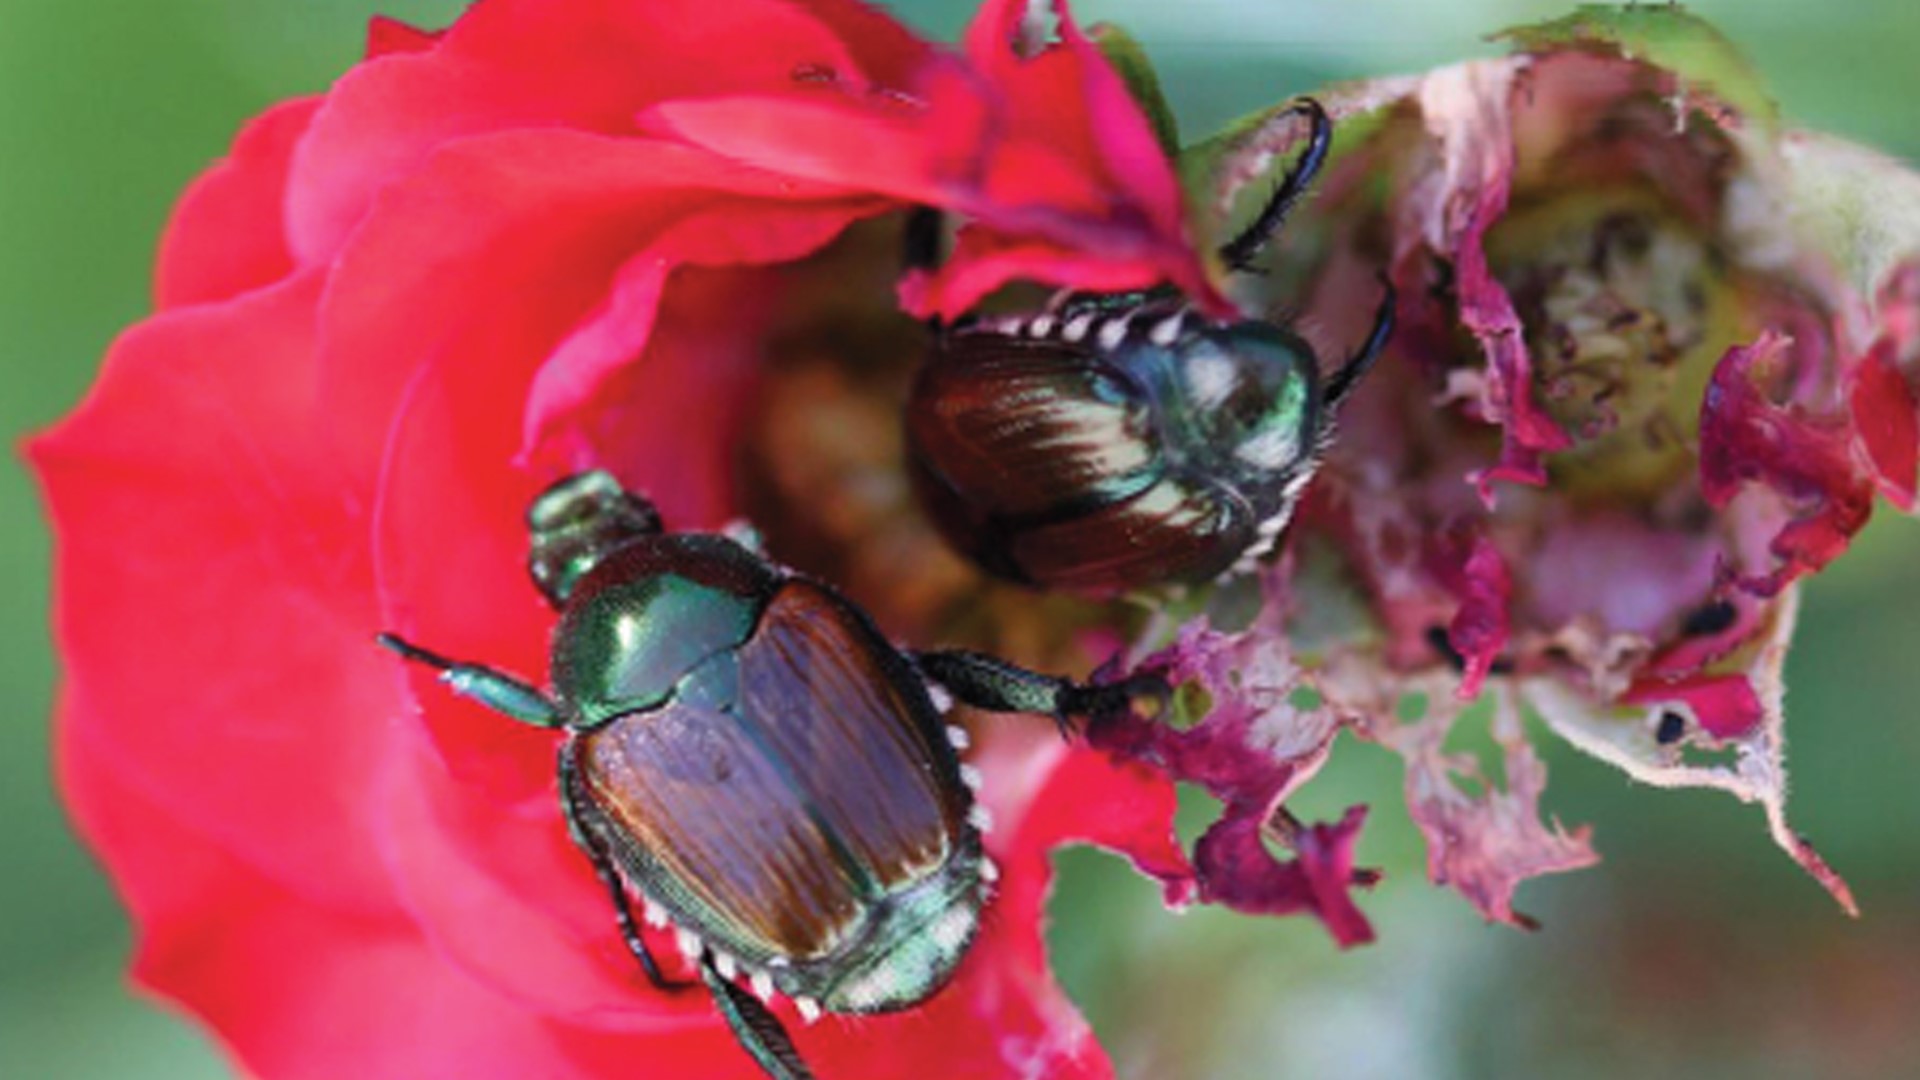 Japanese beetles seem to be everywhere this time of year. Here are some tips on how to get rid of them.